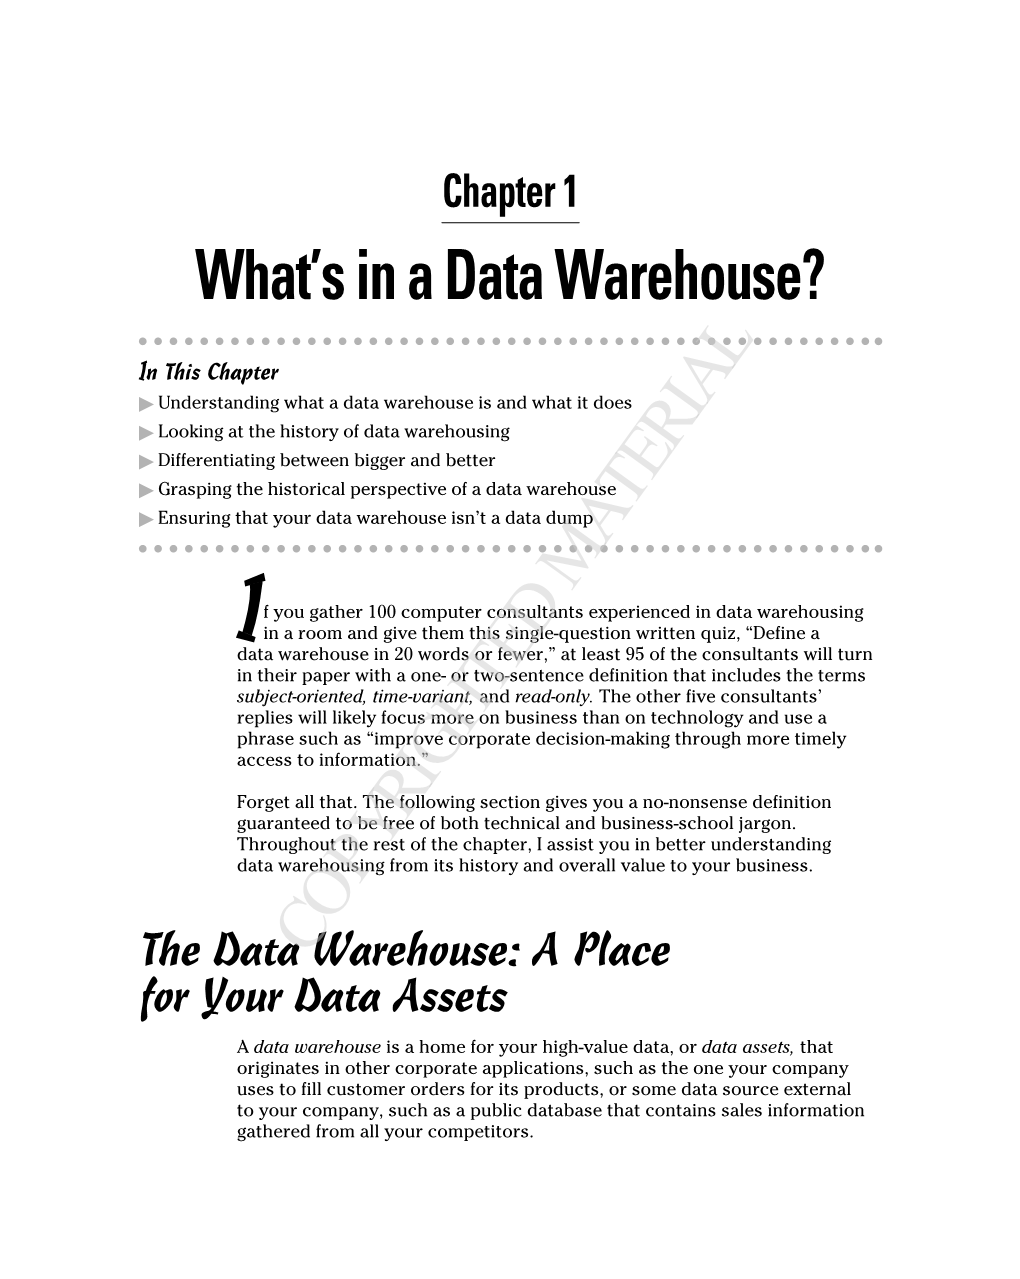 The Data Warehouse: Home for Your Data Assets